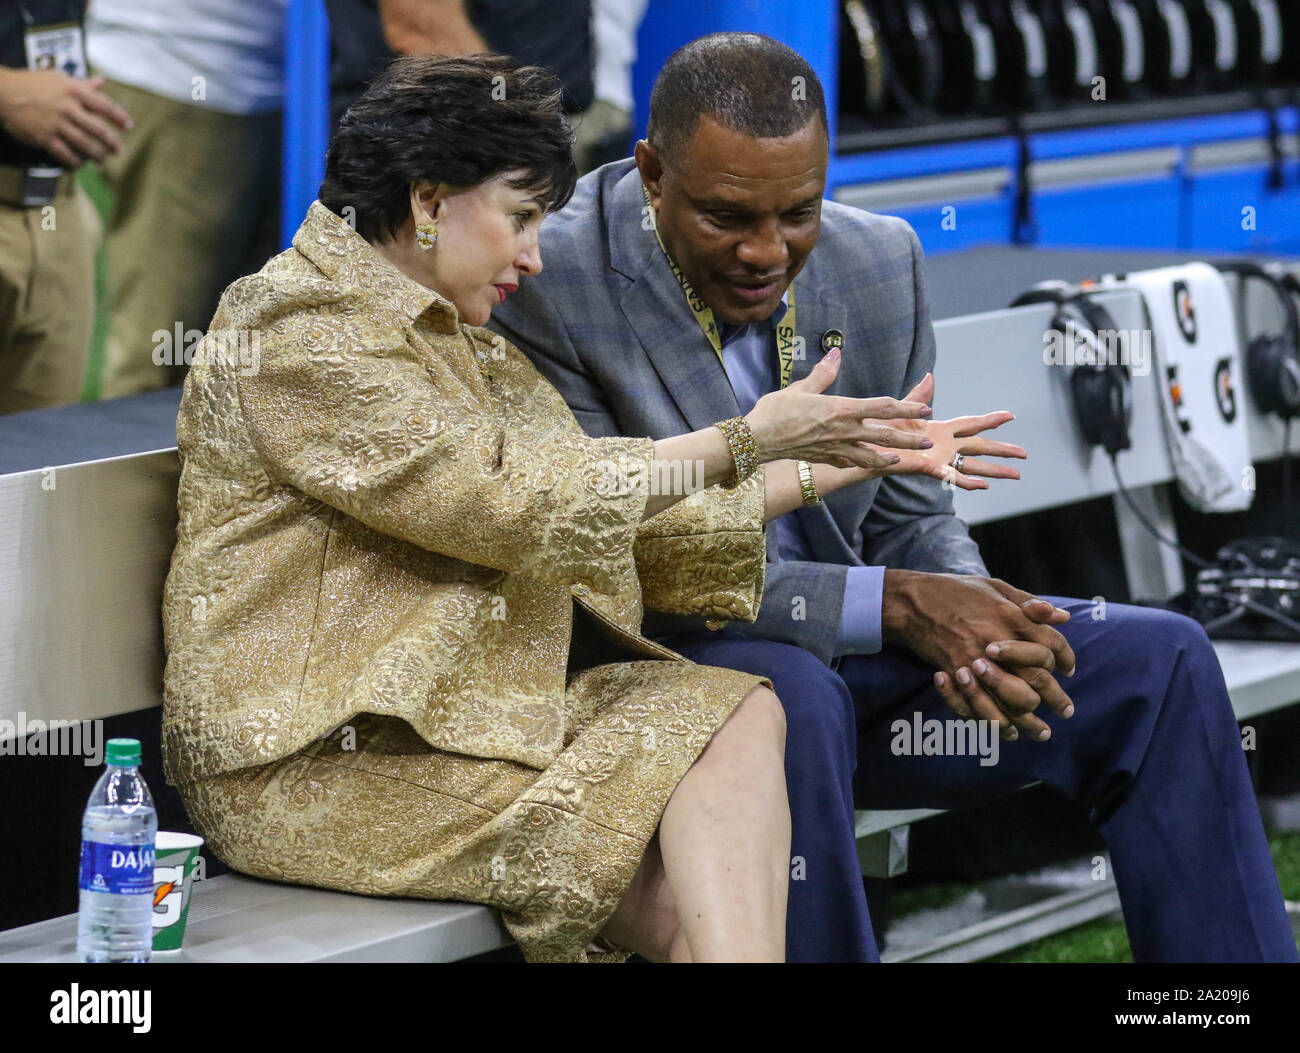 New Orleans, LA, USA. 29th Sep, 2019. New Orleans Saints and Pelicans owner Mrs. Gayle Benson (left) sits and talks with New Orleans Pelicans Head Coach Alvin Gentry (right) before NFL game action between the New Orleans Saints and the Dallas Cowboys at the Mercedes Benz Superdome in New Orleans, LA. Jonathan Mailhes/CSM/Alamy Live News Stock Photo